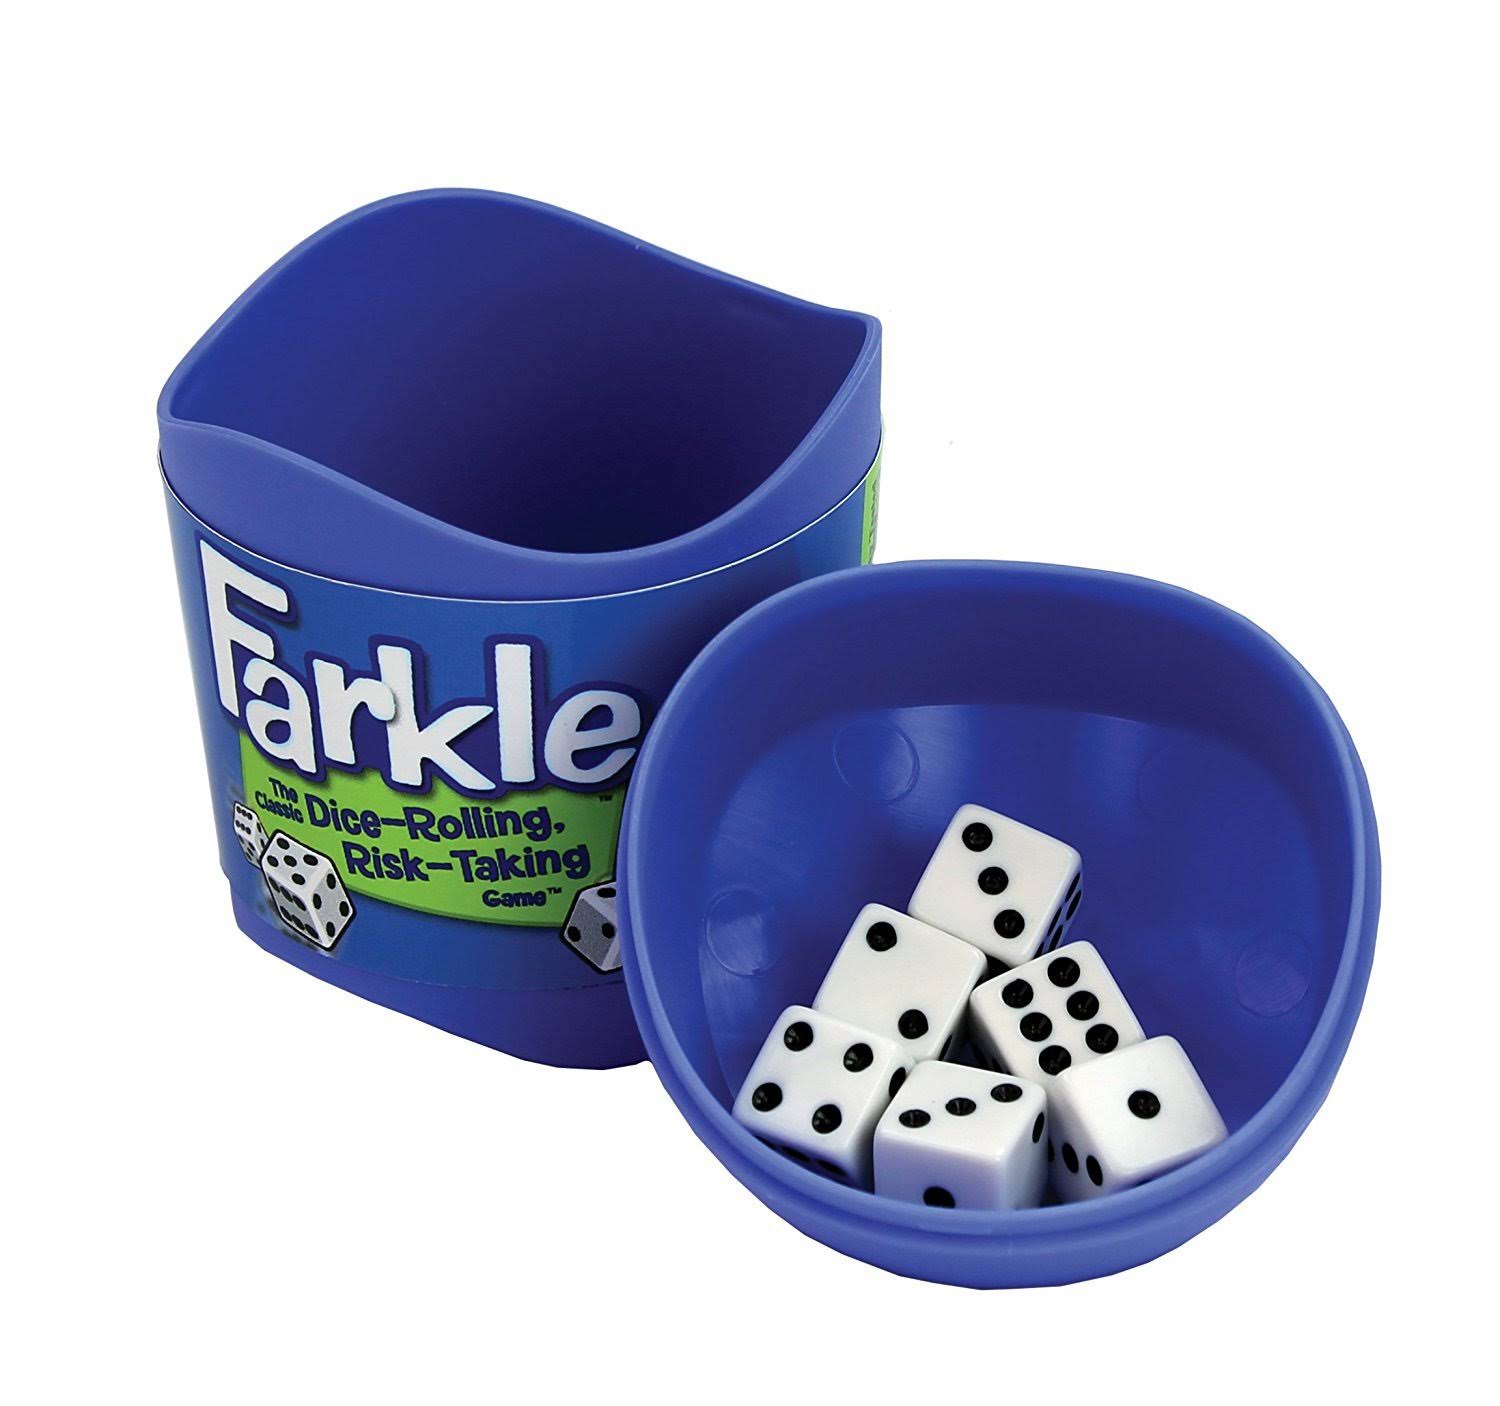 Farkle The Classic Dice-Rolling Risk Taking Game